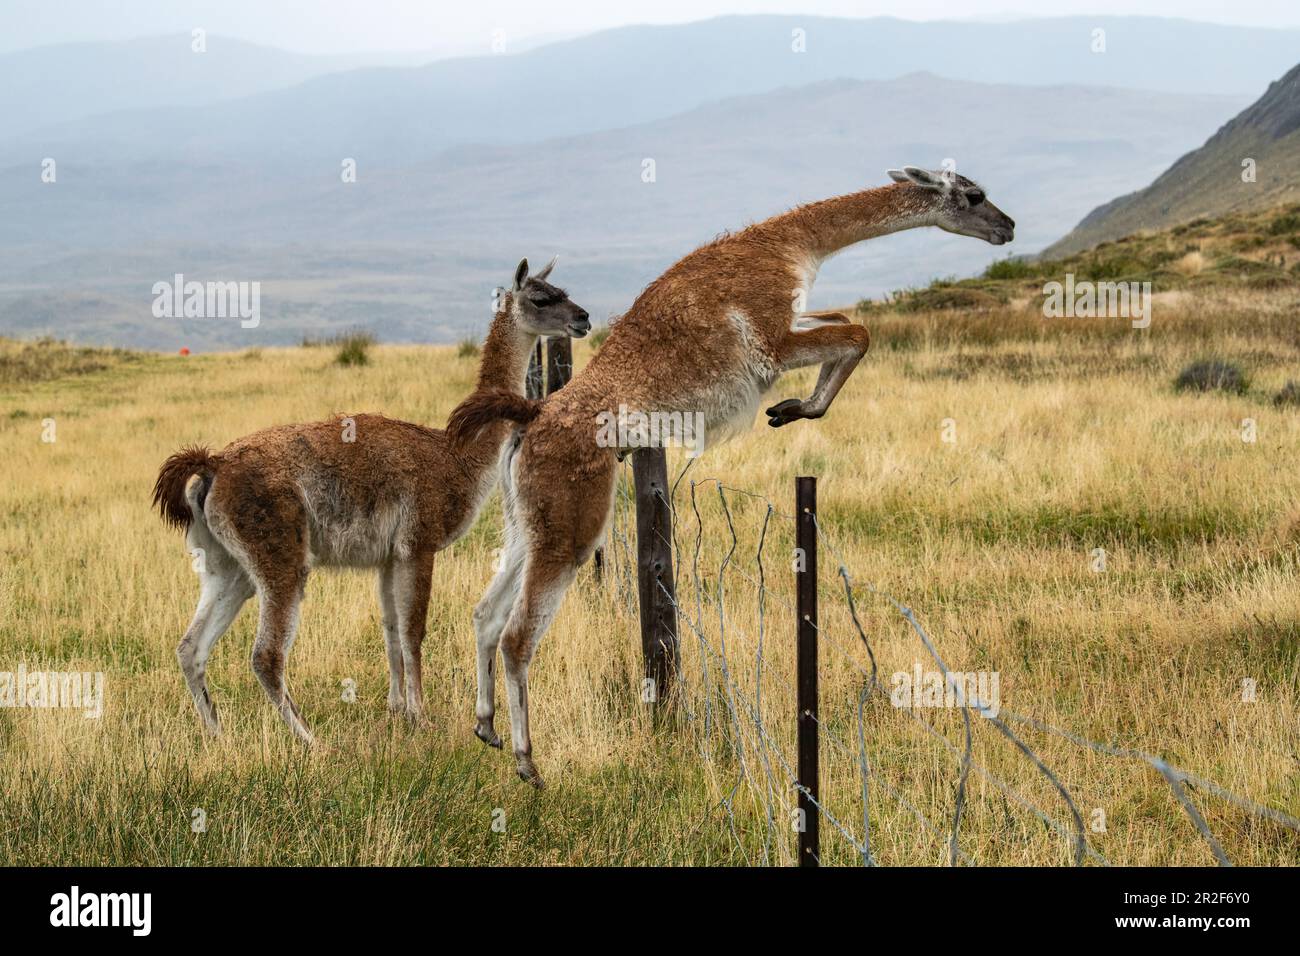 A guanaco (Lama guanicoe) jumps over a wire fence while another first watches, Puerto Natales, Magallanes y de la Antartica Chilena, Patagonia, Chile, Stock Photo